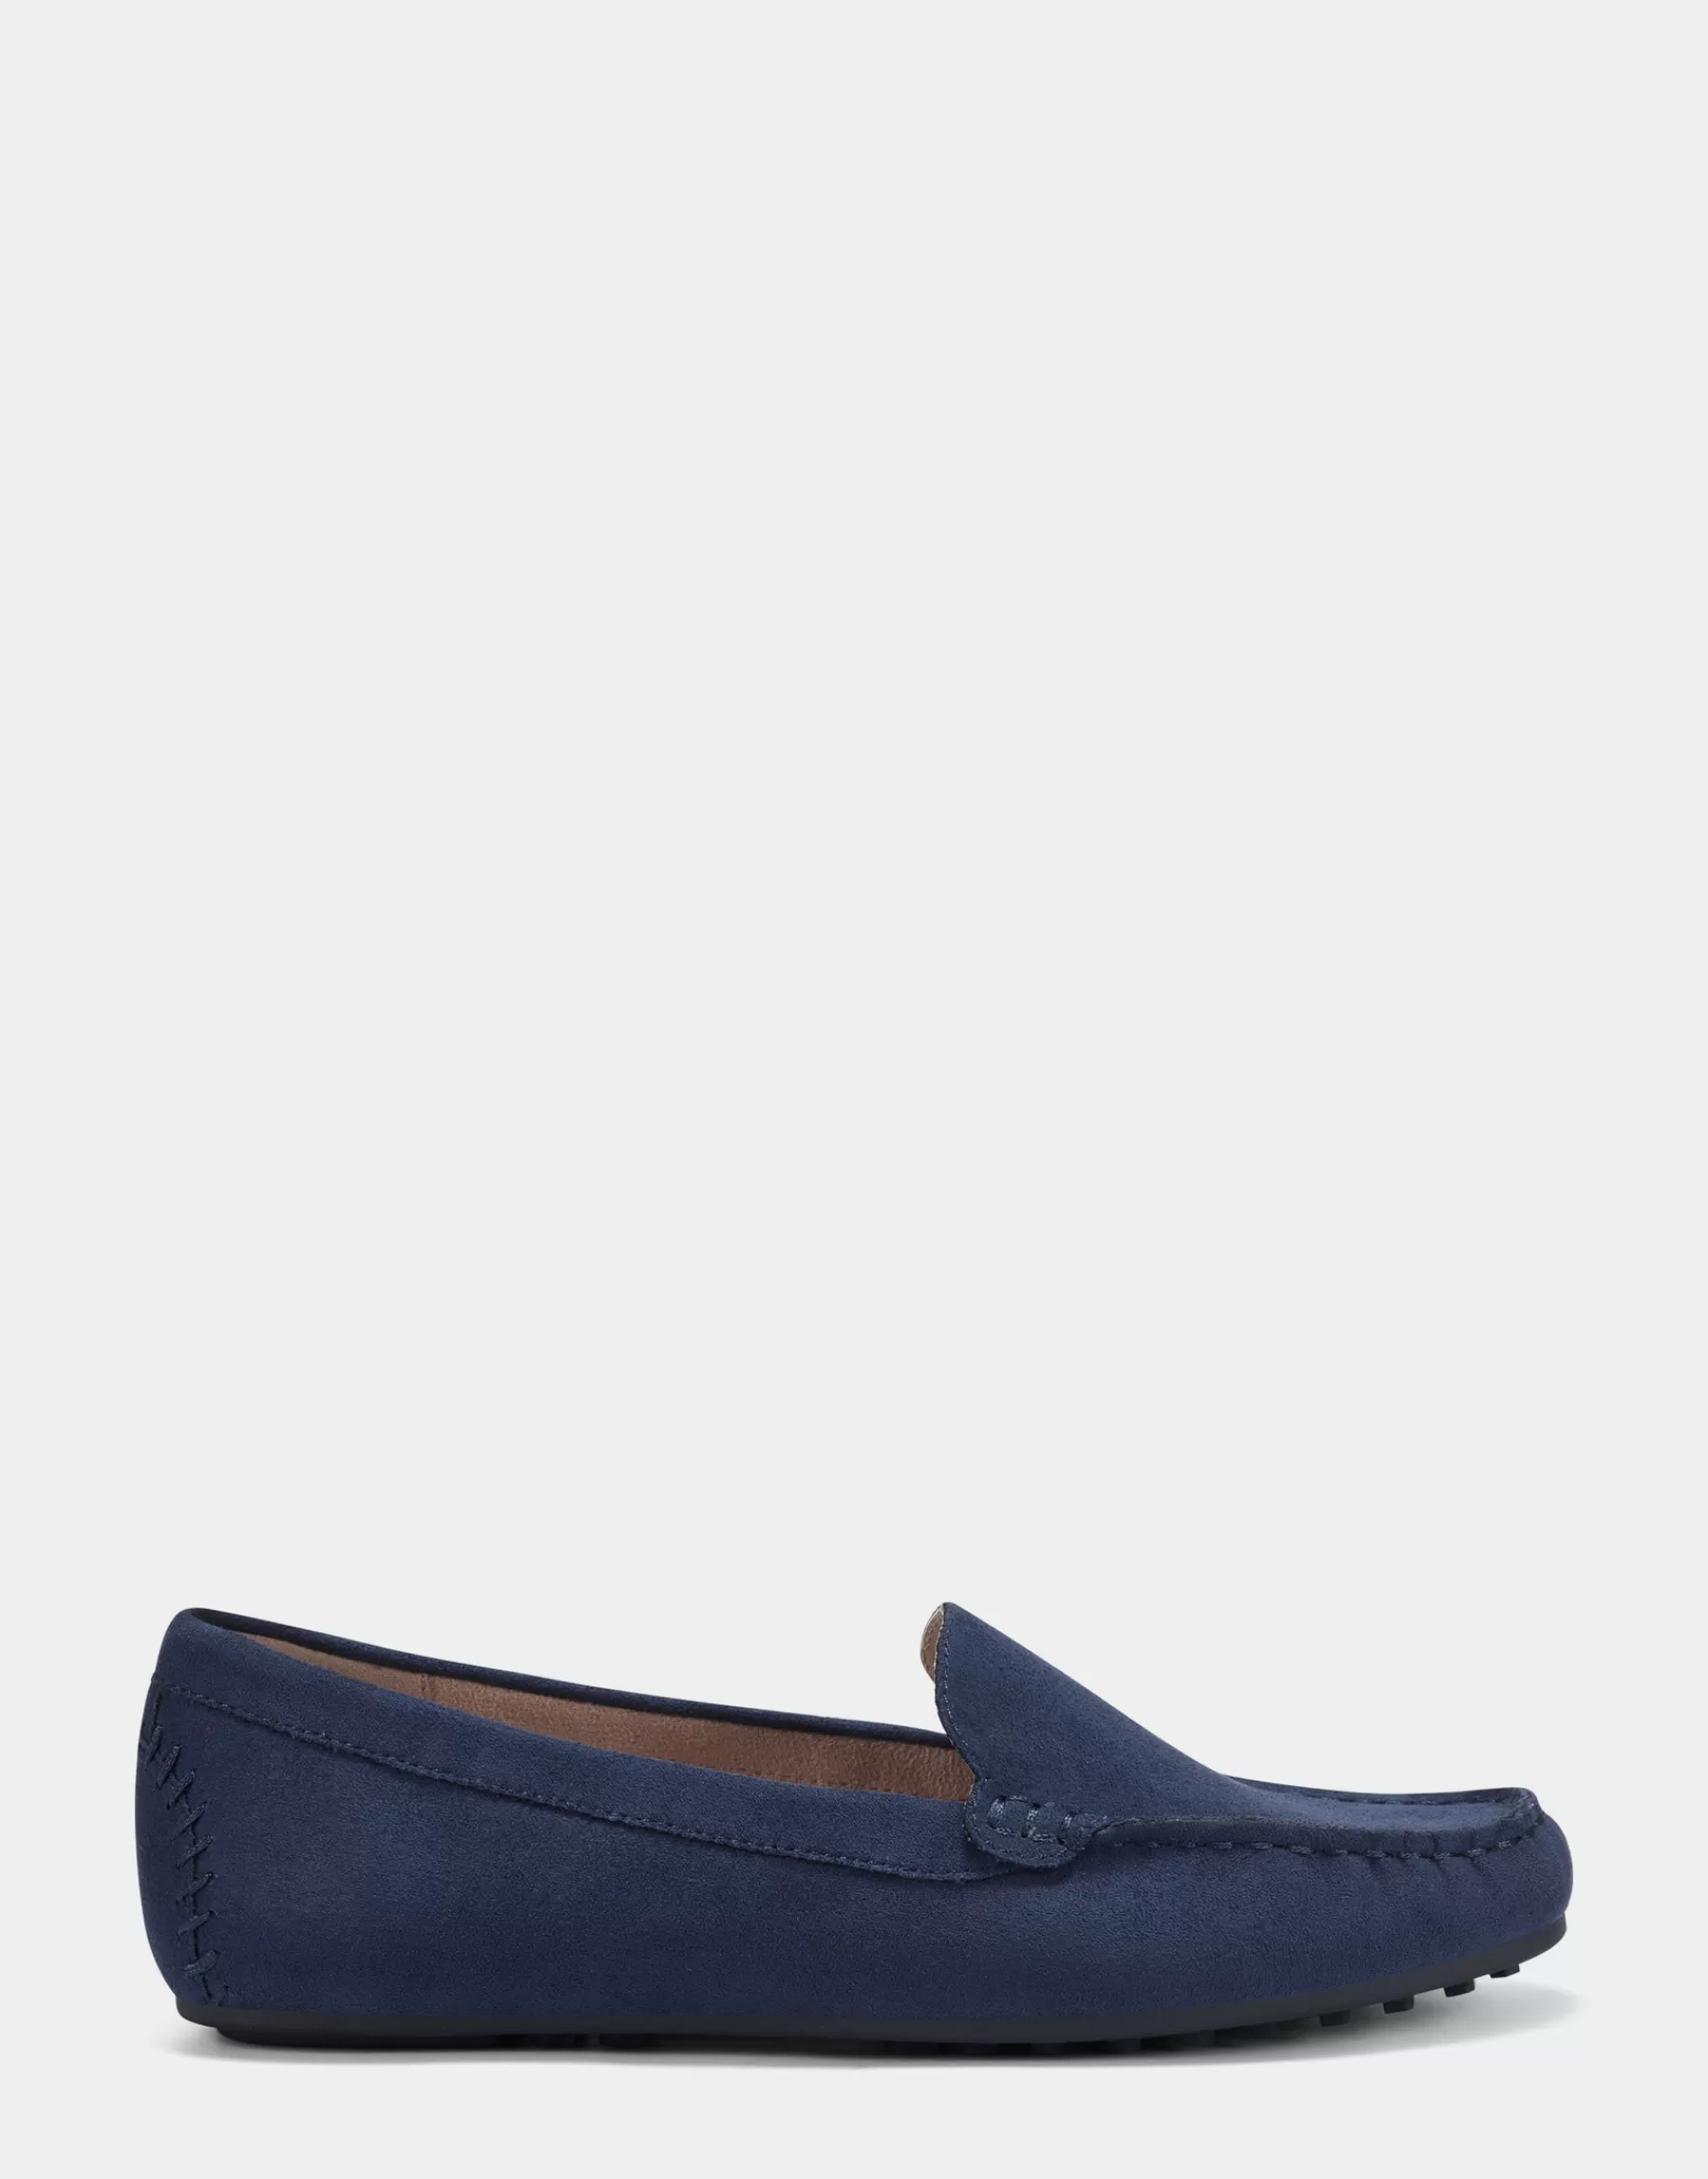 Aerosoles Comfortable Women's Loafer in Navy Faux Suede Cheap